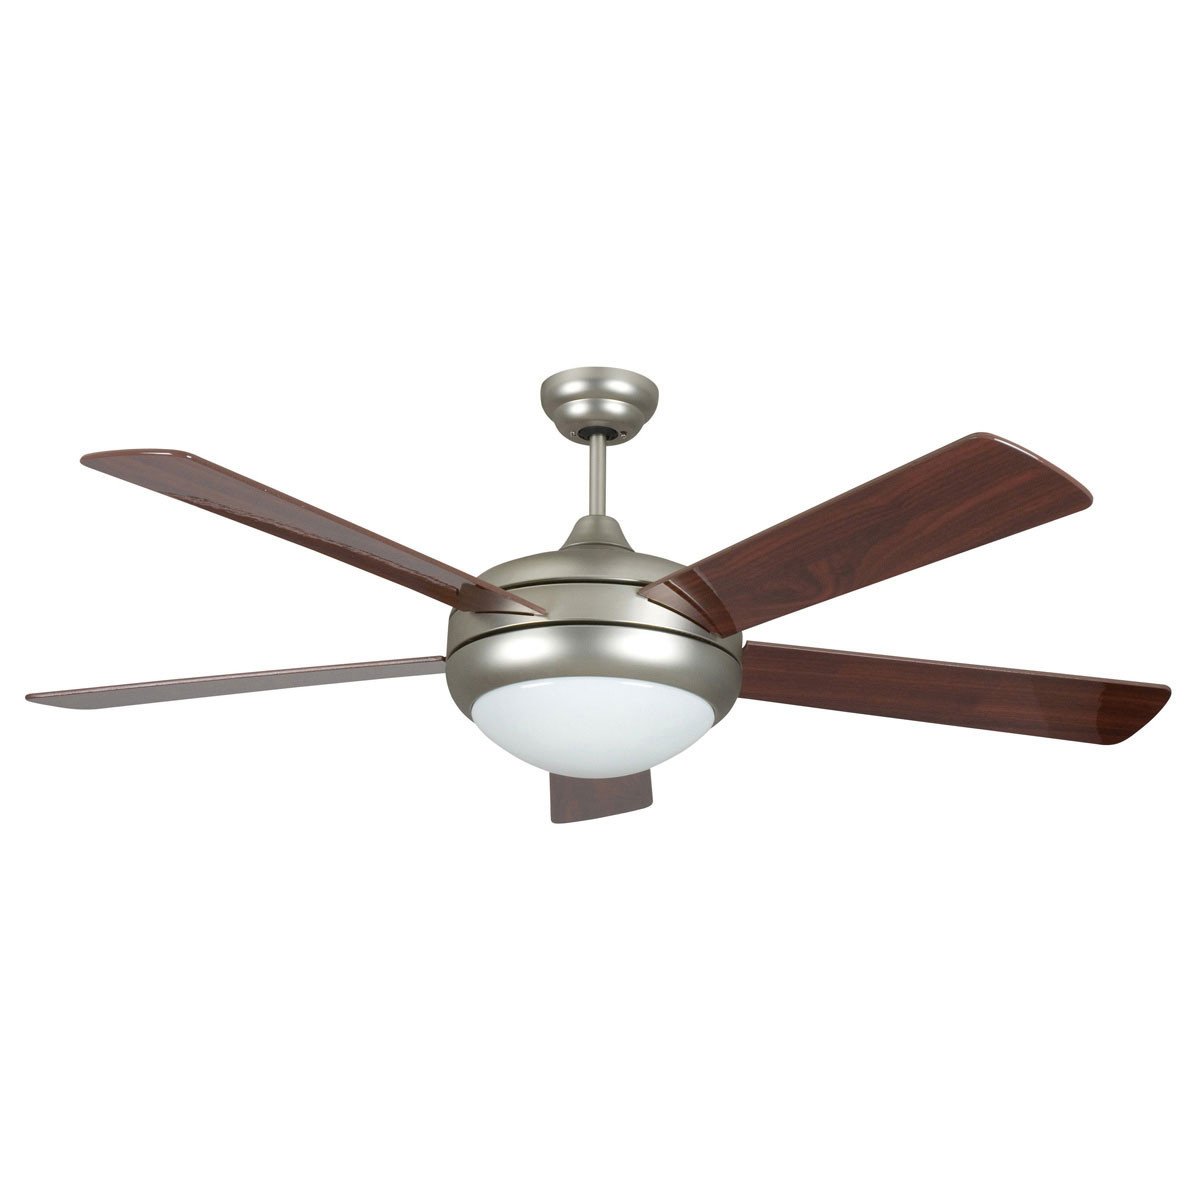 Concord Fans 52" Saturn Modern Satin Nickel Ceiling Fan with Light & Remote